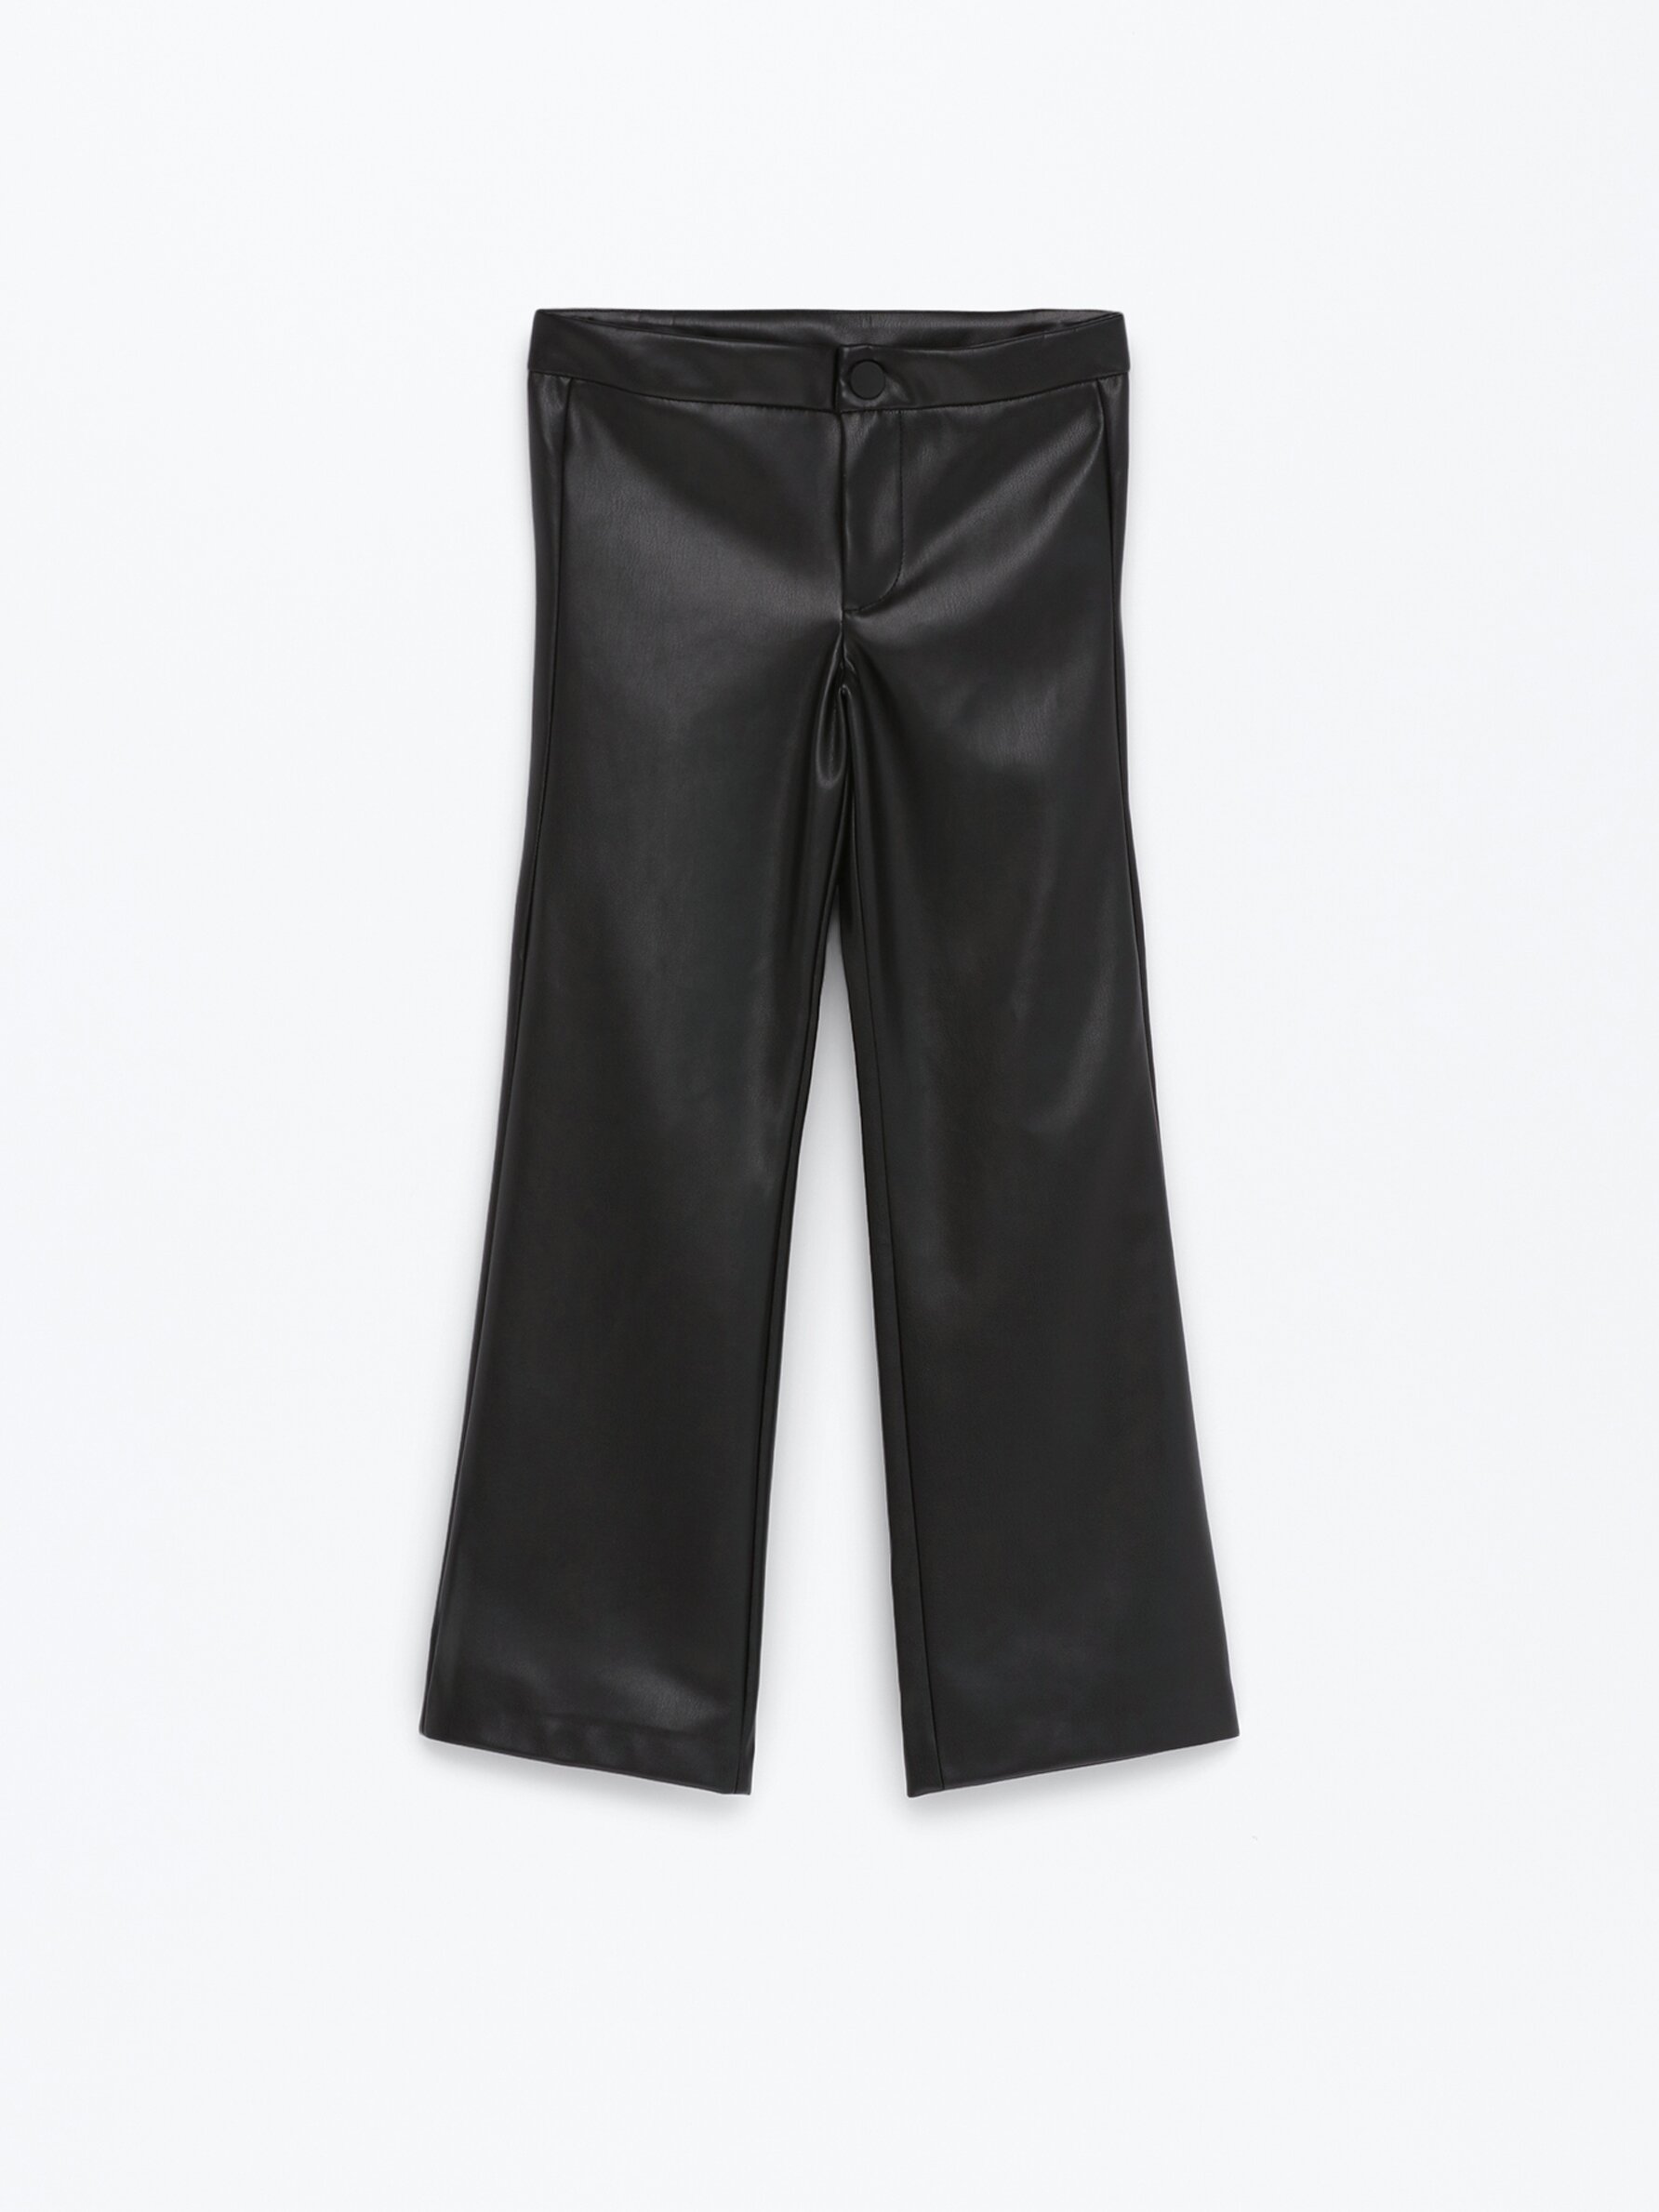 Zara Black Leather Trousers Limited Edition Size Small 5479 951 RRP £189 |  eBay